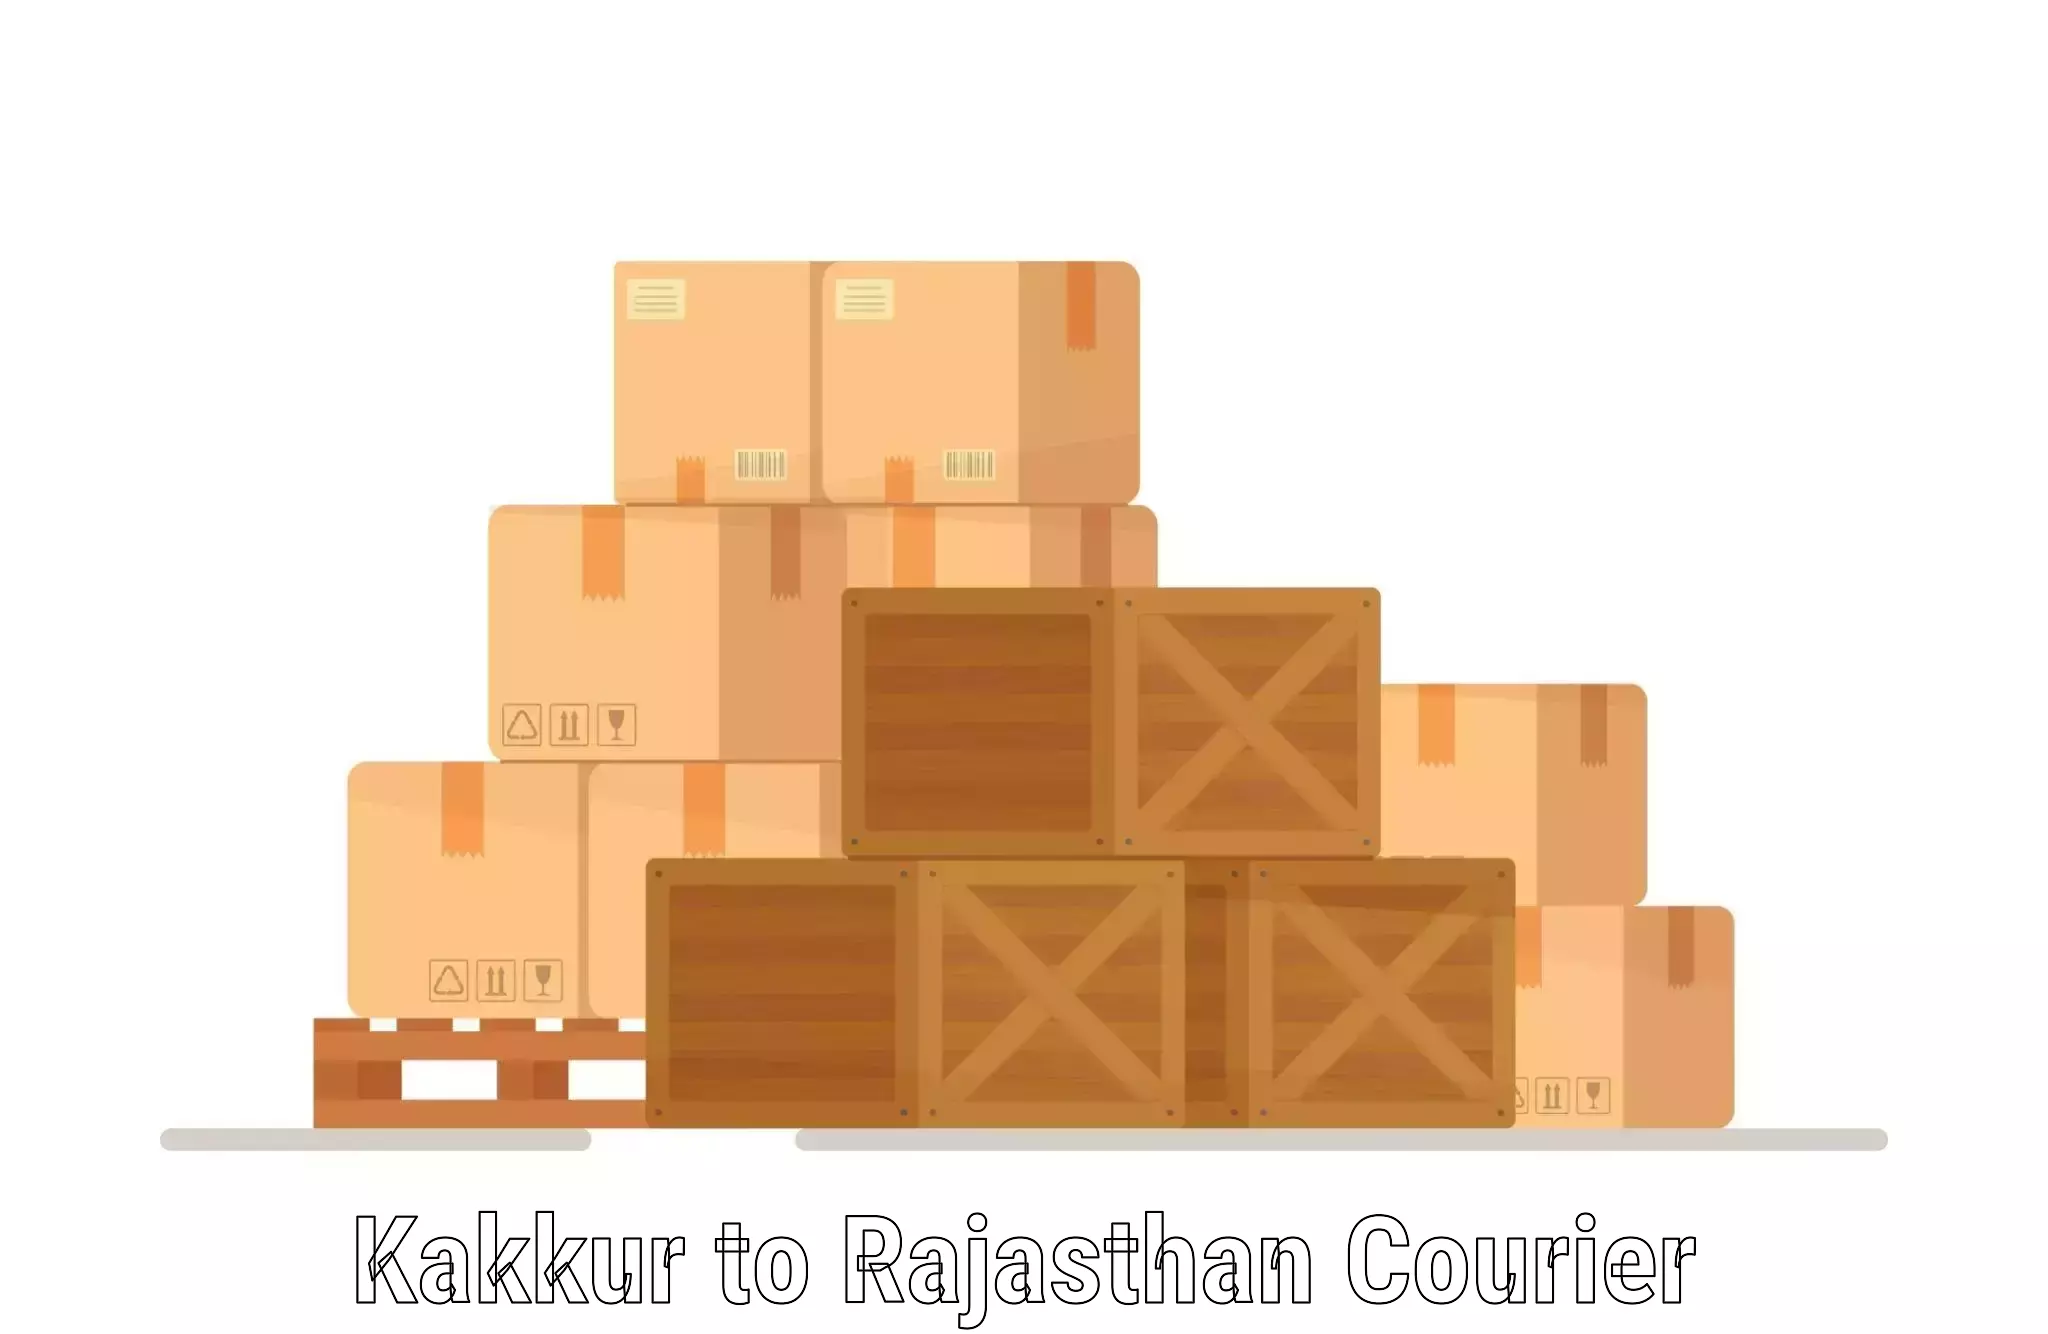 Sustainable shipping practices Kakkur to Udaipur